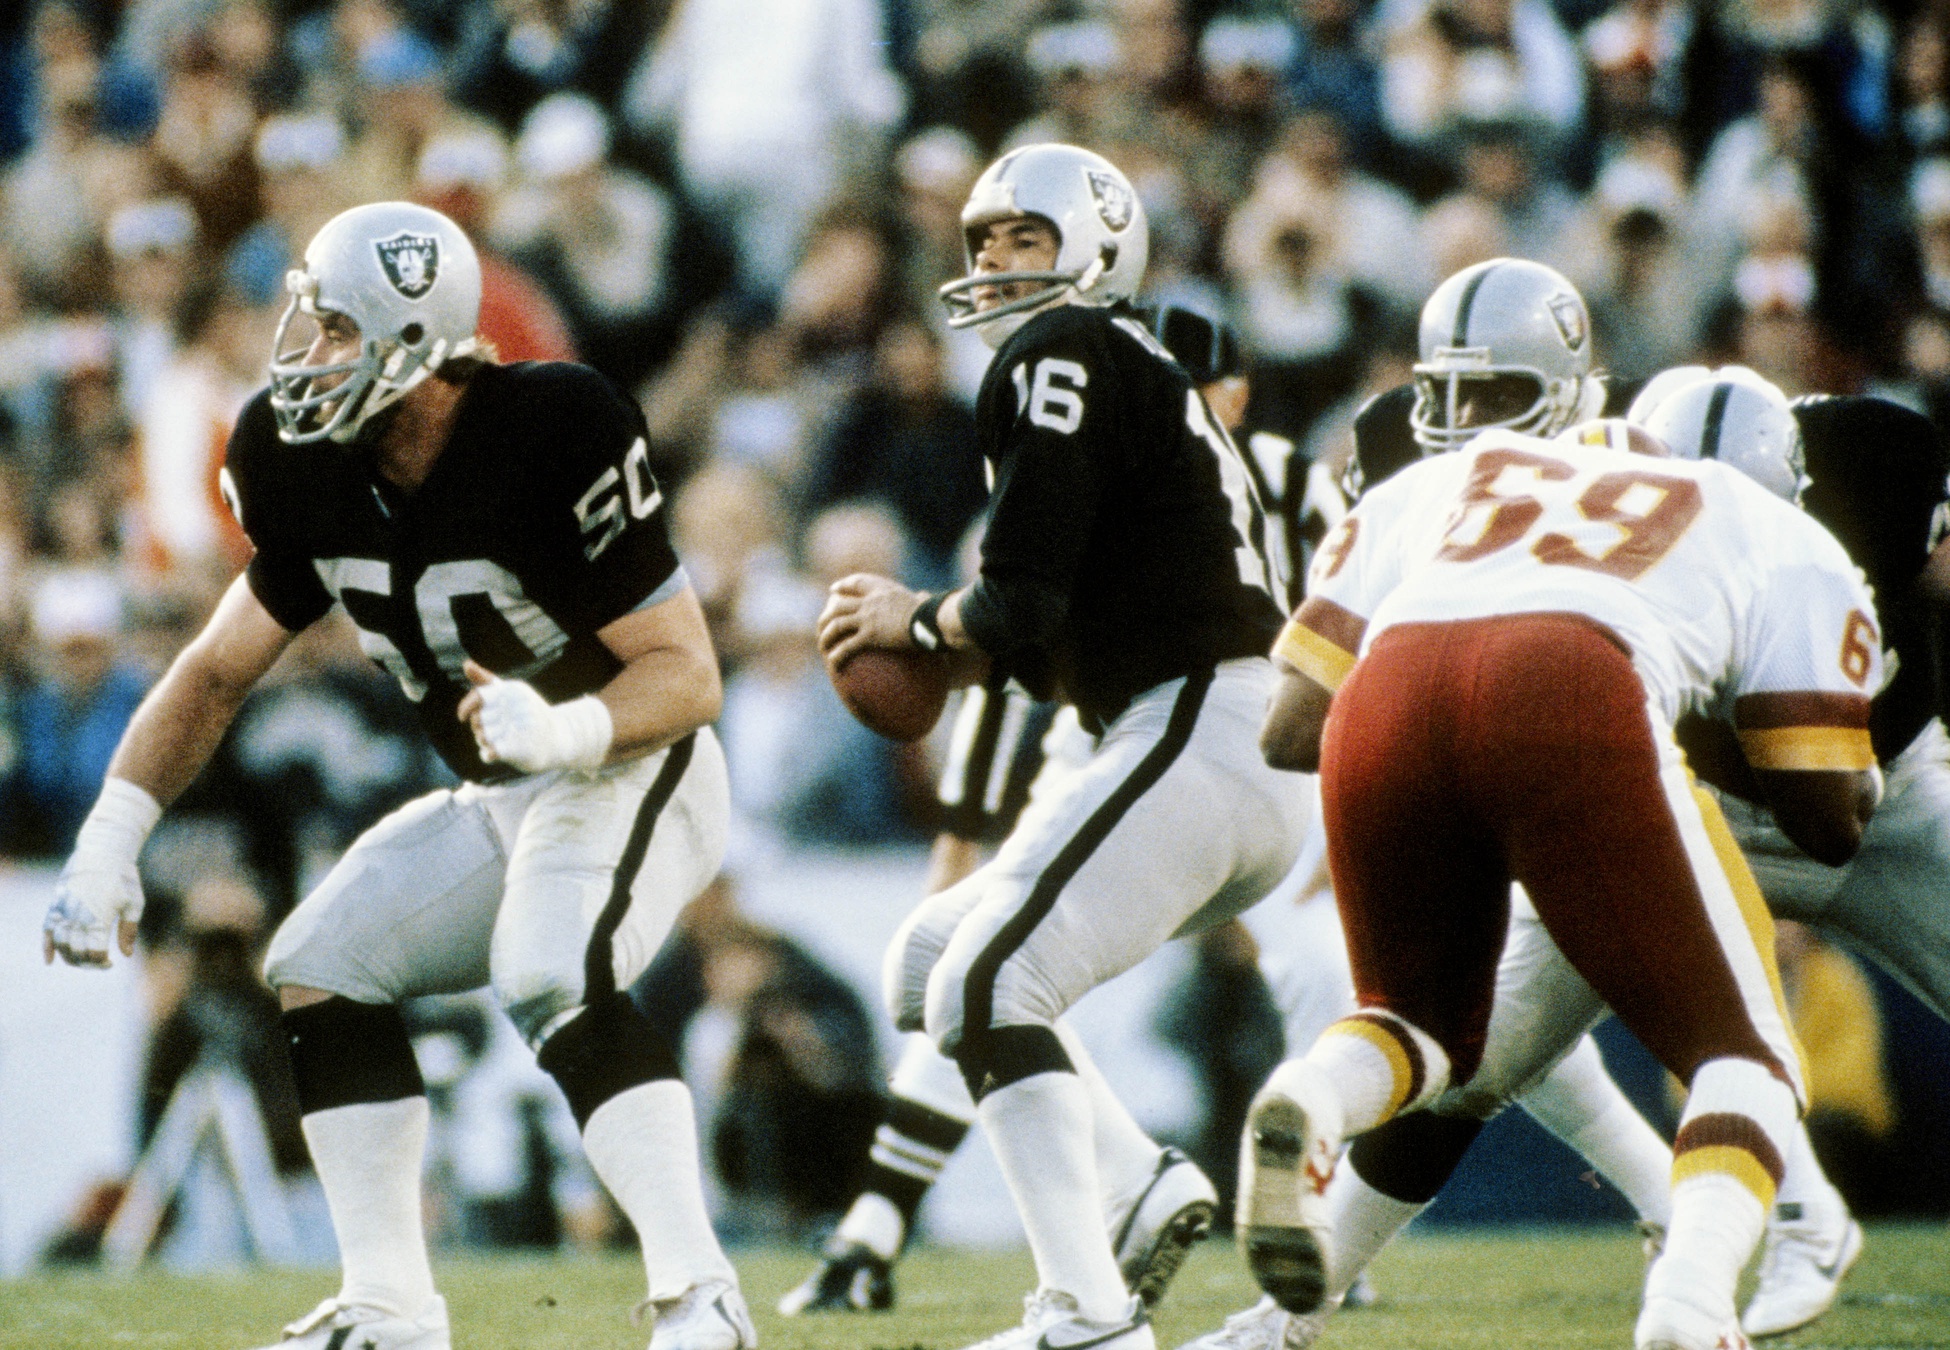 Dave Dalby was terrific for the Raiders, but following the greatest ever in Jim Otto cost him highly-earned respect.